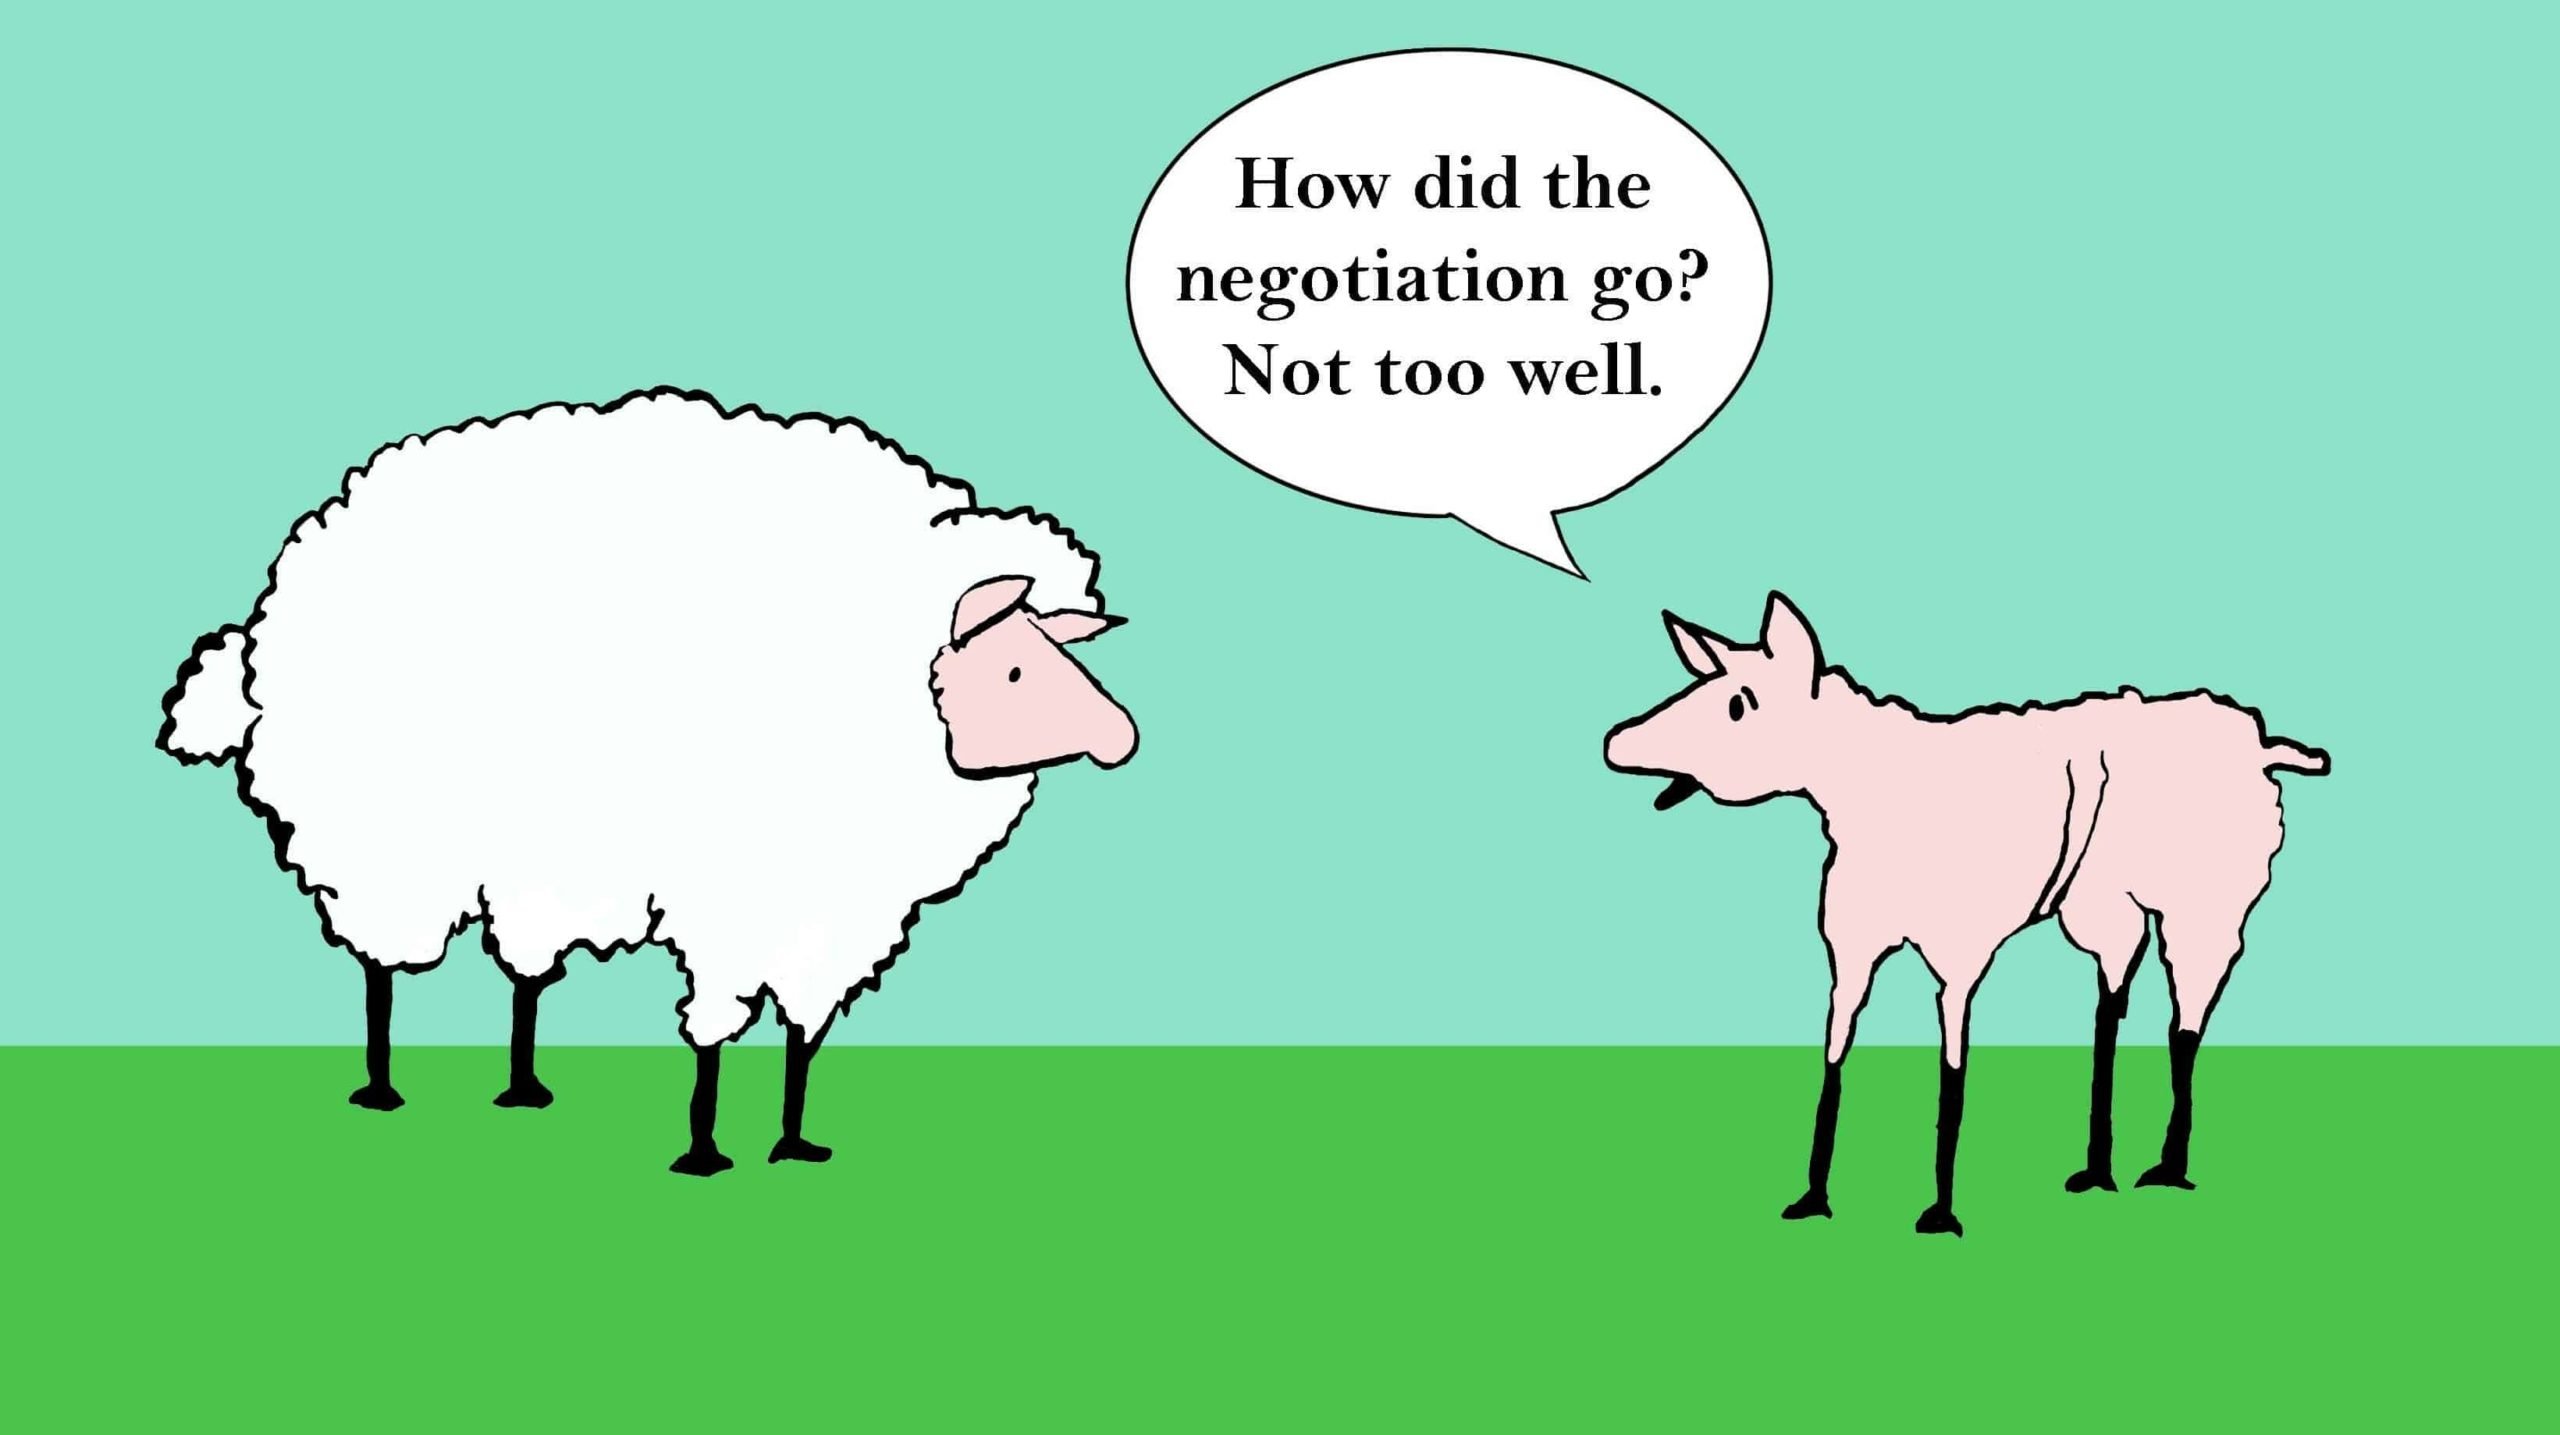 Cartoon of two sheep, one totally sheared saying," How did the negotiation go? Not too well."